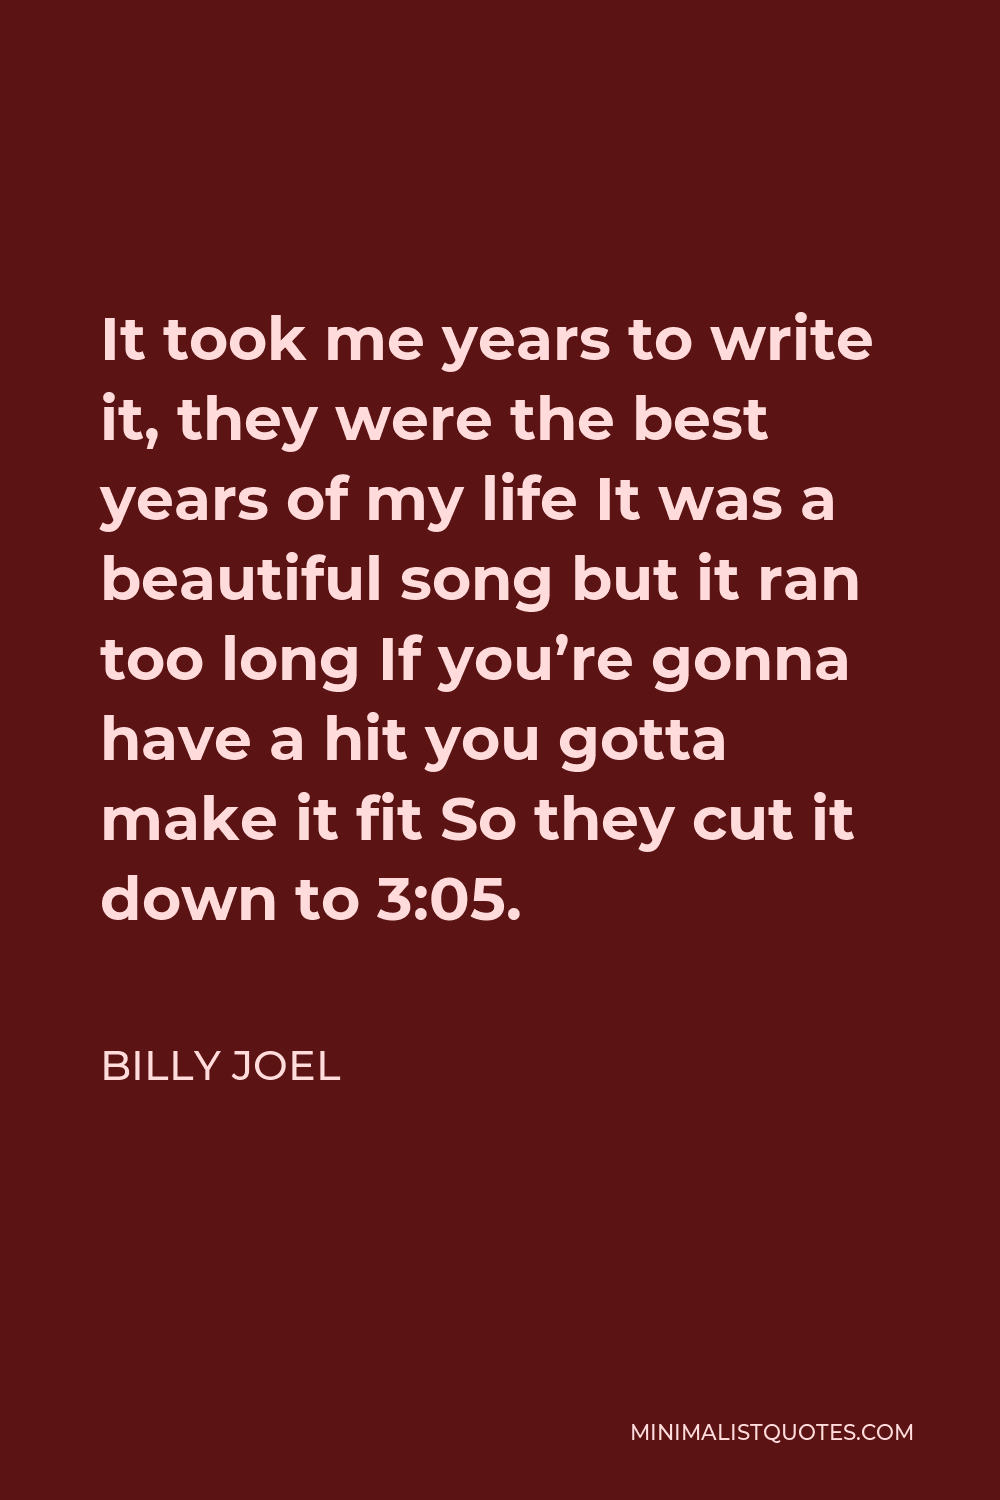 Billy Joel Quote - It took me years to write it, they were the best years of my life It was a beautiful song but it ran too long If you’re gonna have a hit you gotta make it fit So they cut it down to 3:05.